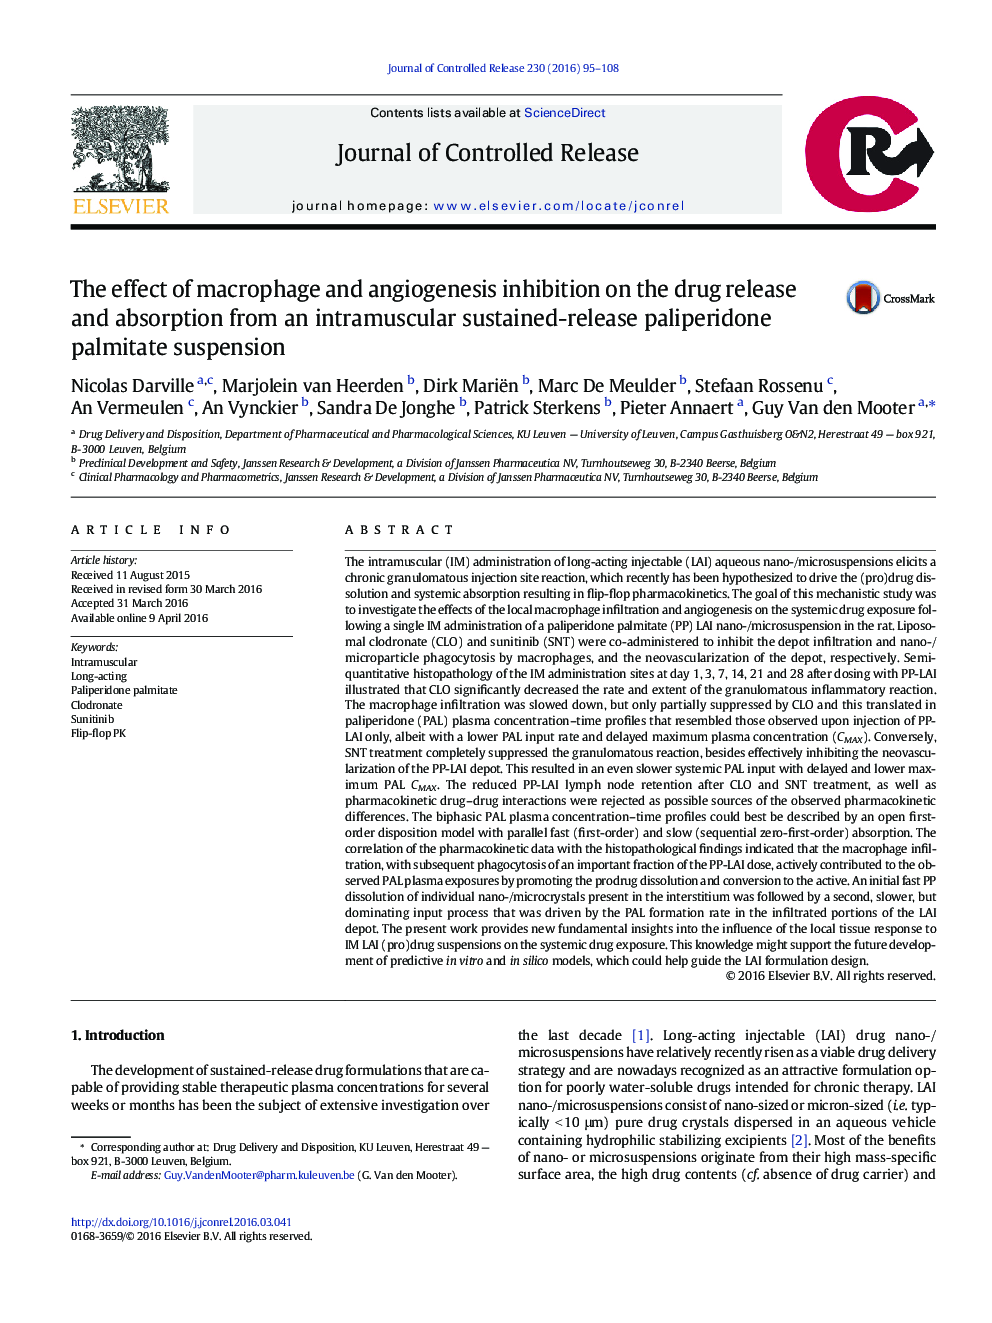 The effect of macrophage and angiogenesis inhibition on the drug release and absorption from an intramuscular sustained-release paliperidone palmitate suspension